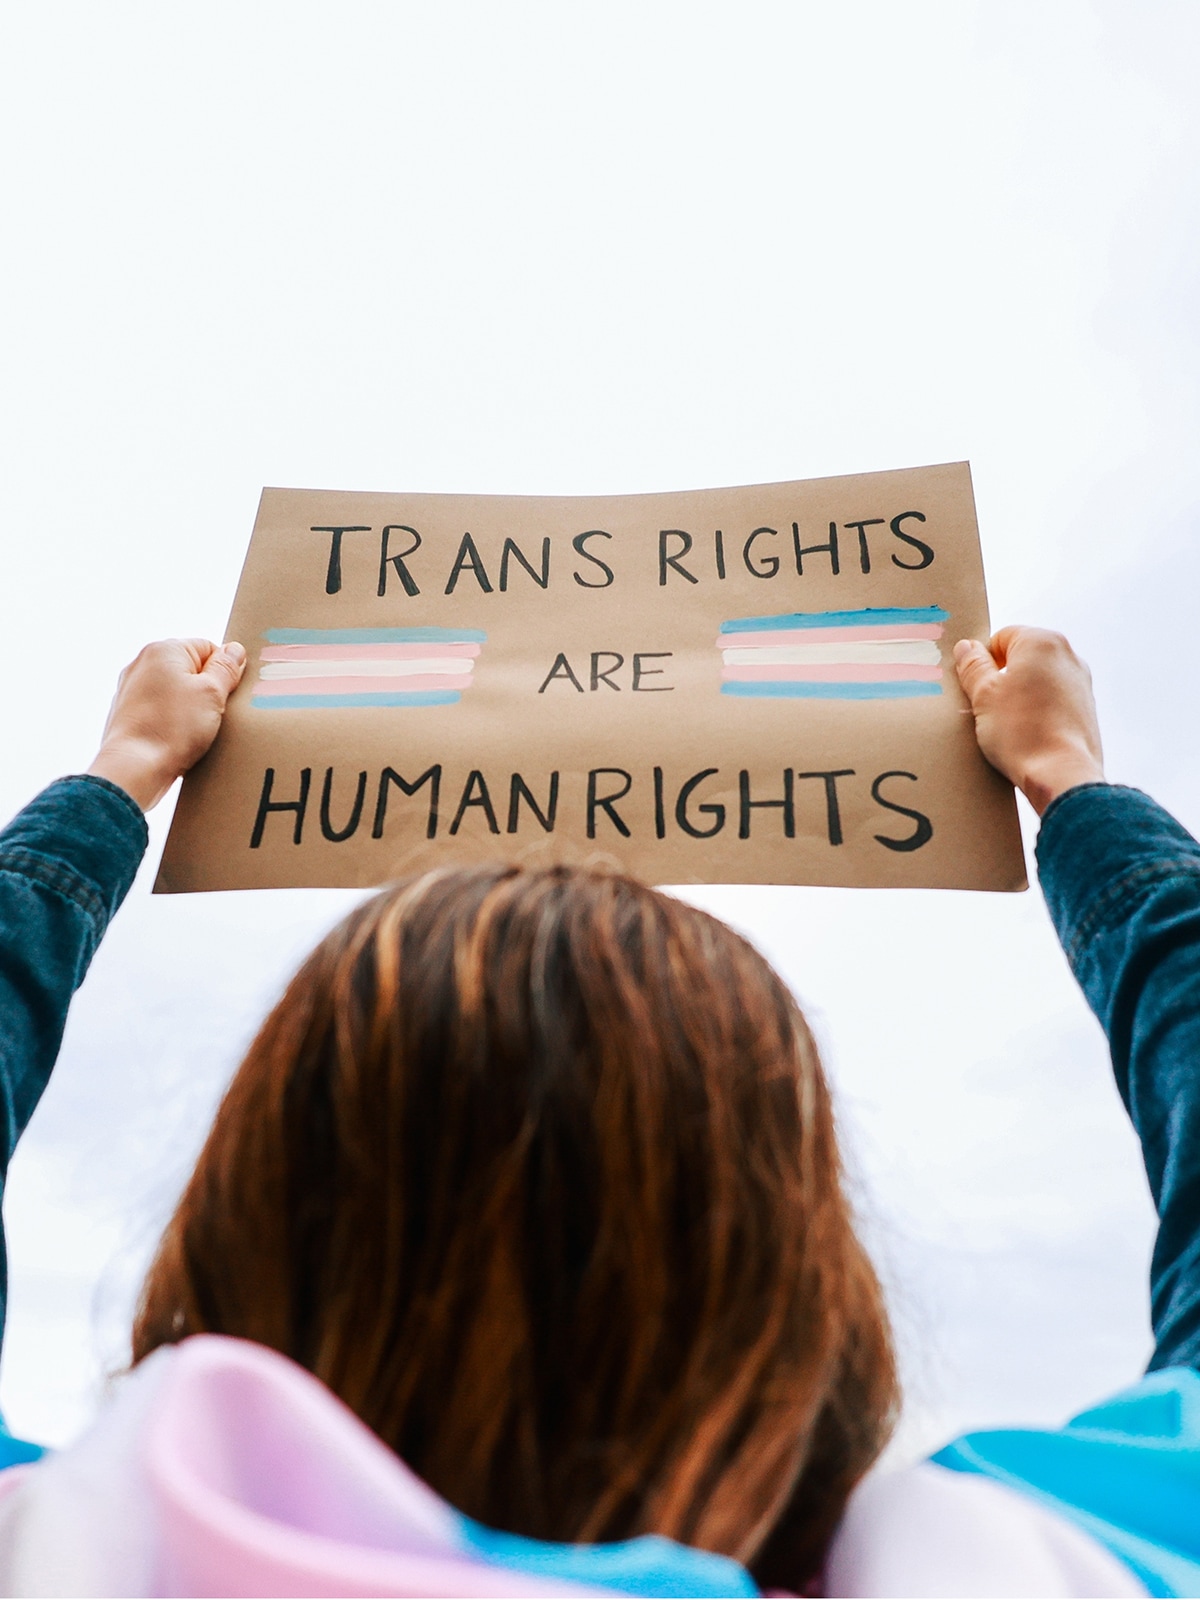 A person with long hair, wearing a trans rights flag, holds up a sign which reads 'Trans rights are human rights